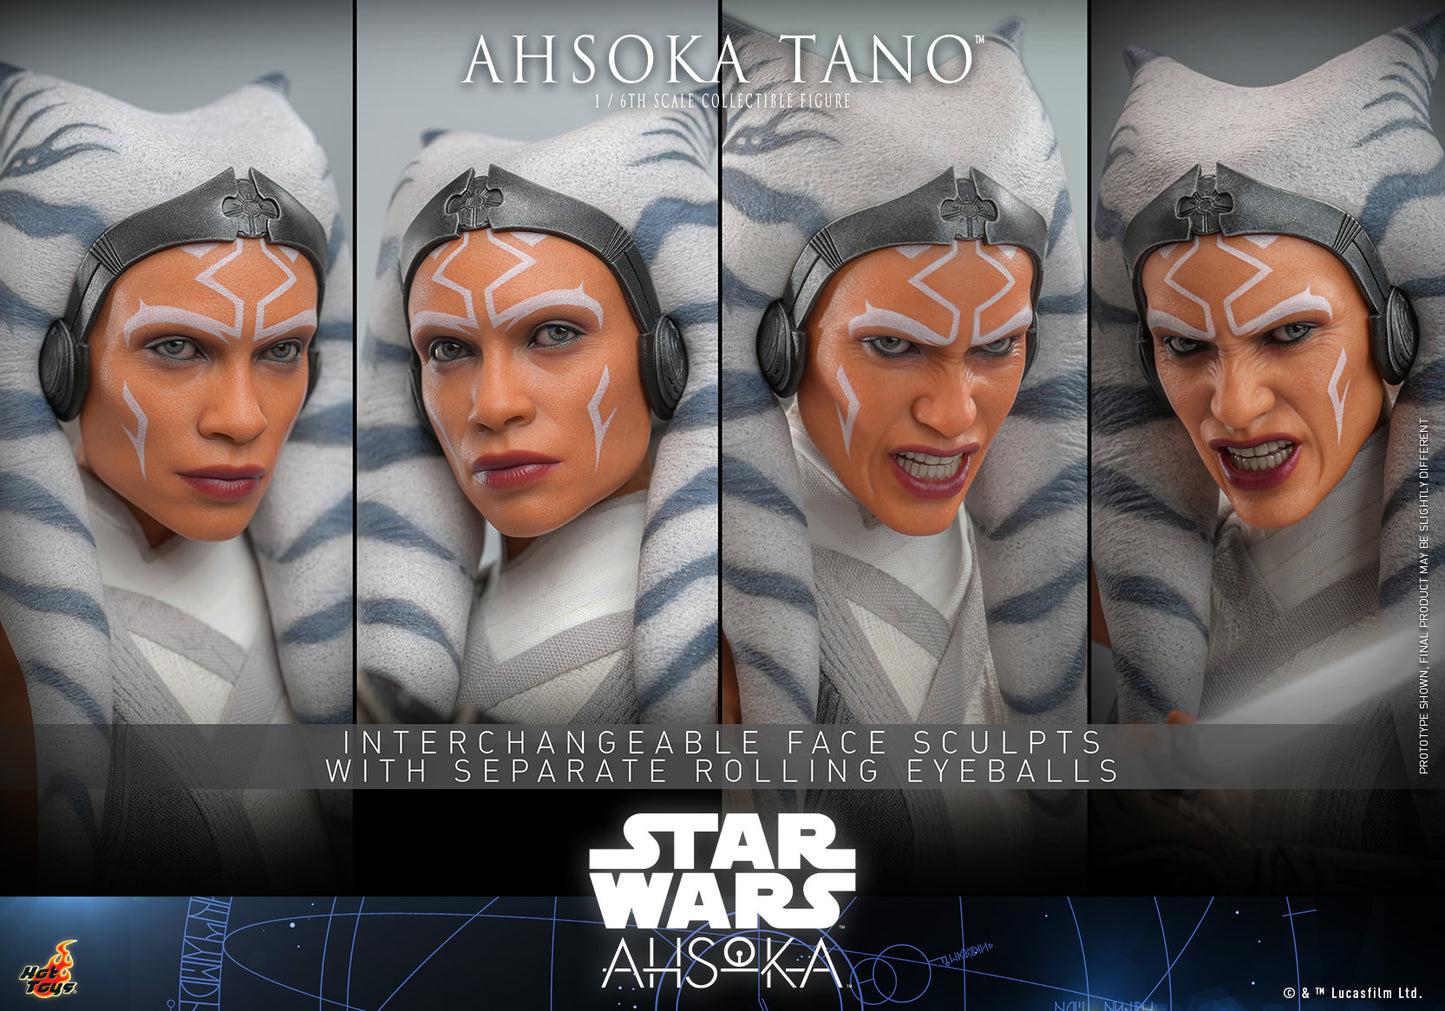 Hot Toys - Star Wars - Ahsoka Tano - 1/6th Scale Collectible Figure - (PRE-ORDER)